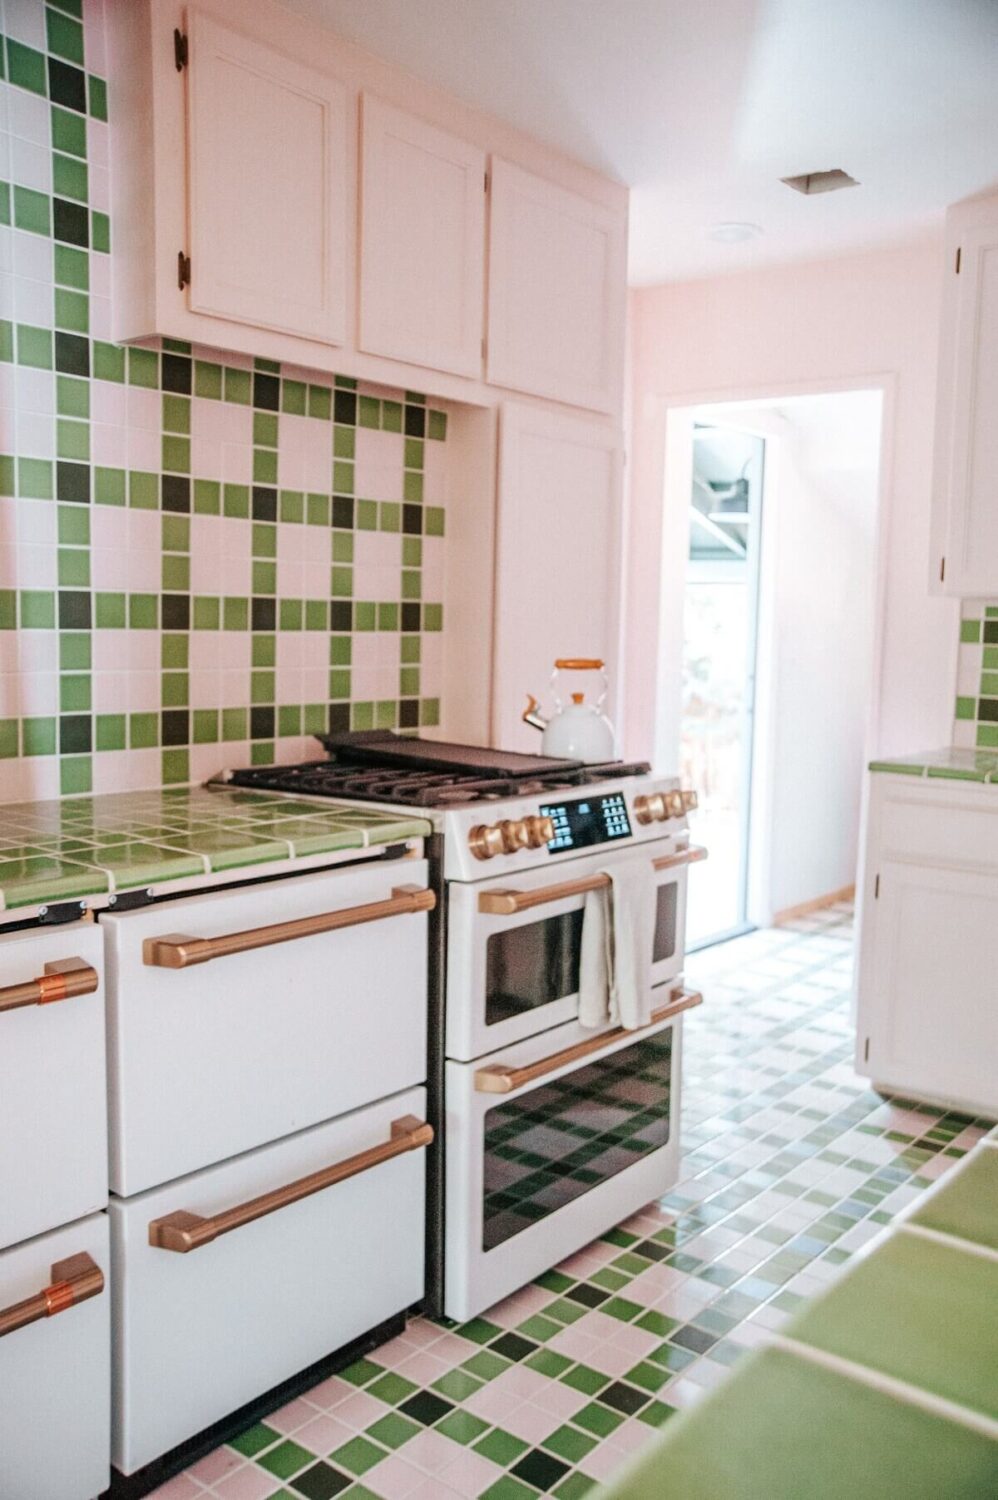 kitchen-green-tiles-airbnb-cabin-nordroom